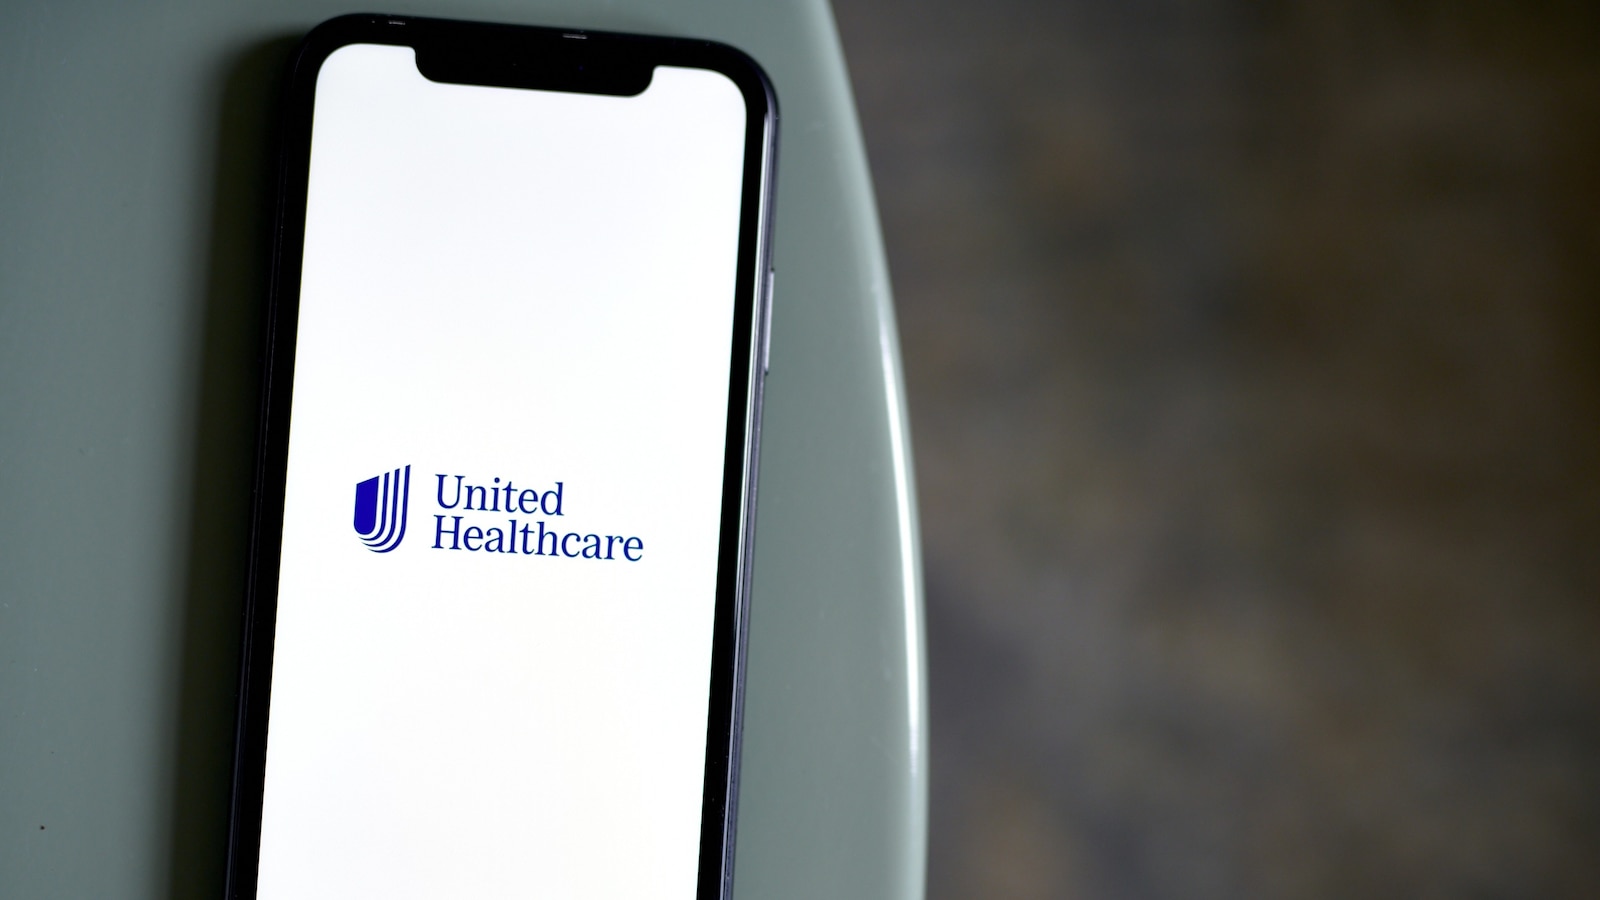 UnitedHealth Group recovering from significant cyberattack: CEO